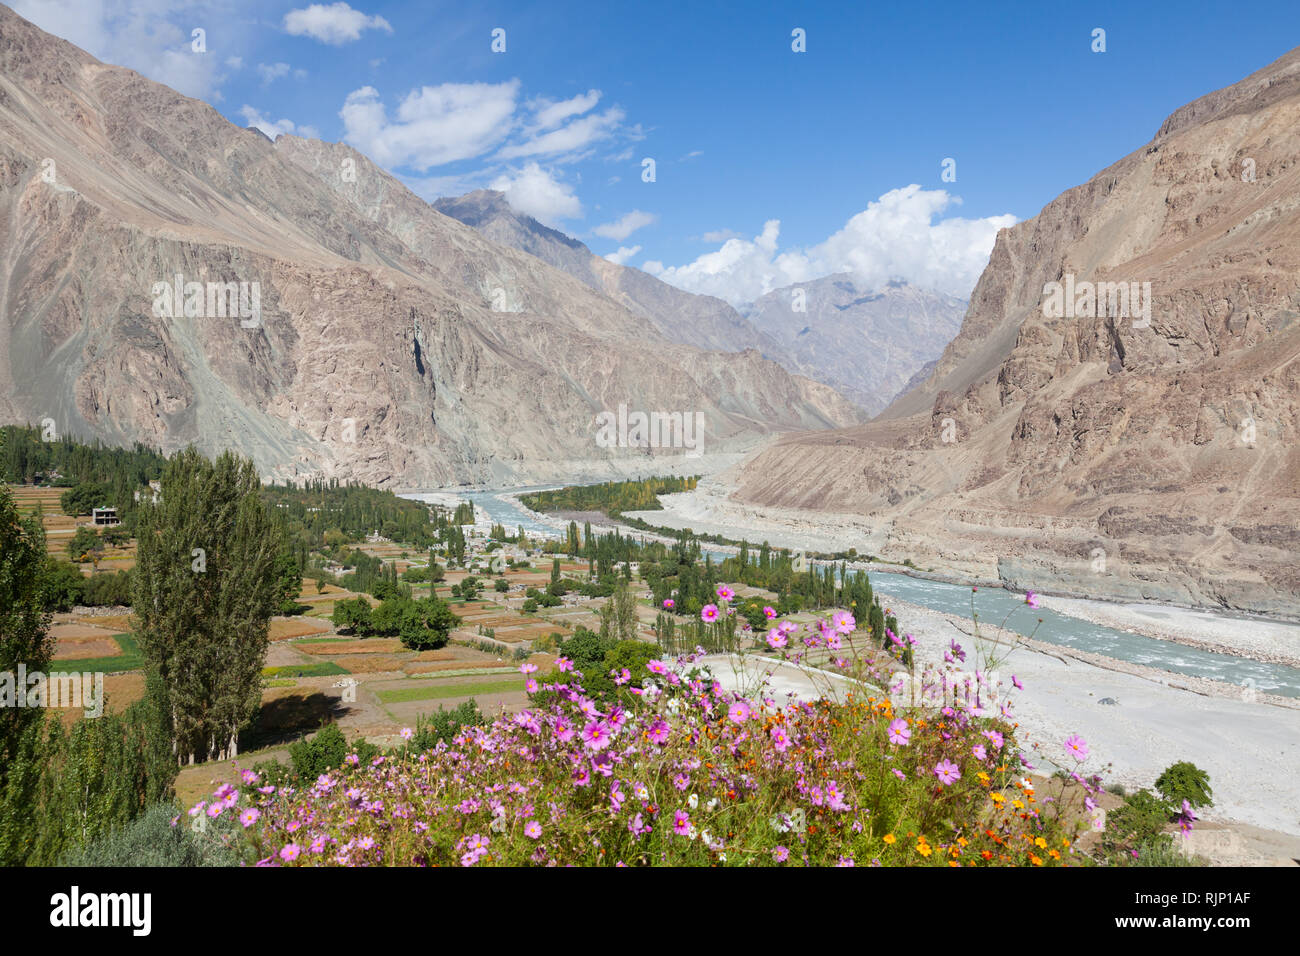 Turtuk village and Shyok River (view from area of Buddhist Gompa in direction of K2 in Pakistan), near Line of Contol, Nubra Valley, Ladakh, India Stock Photo